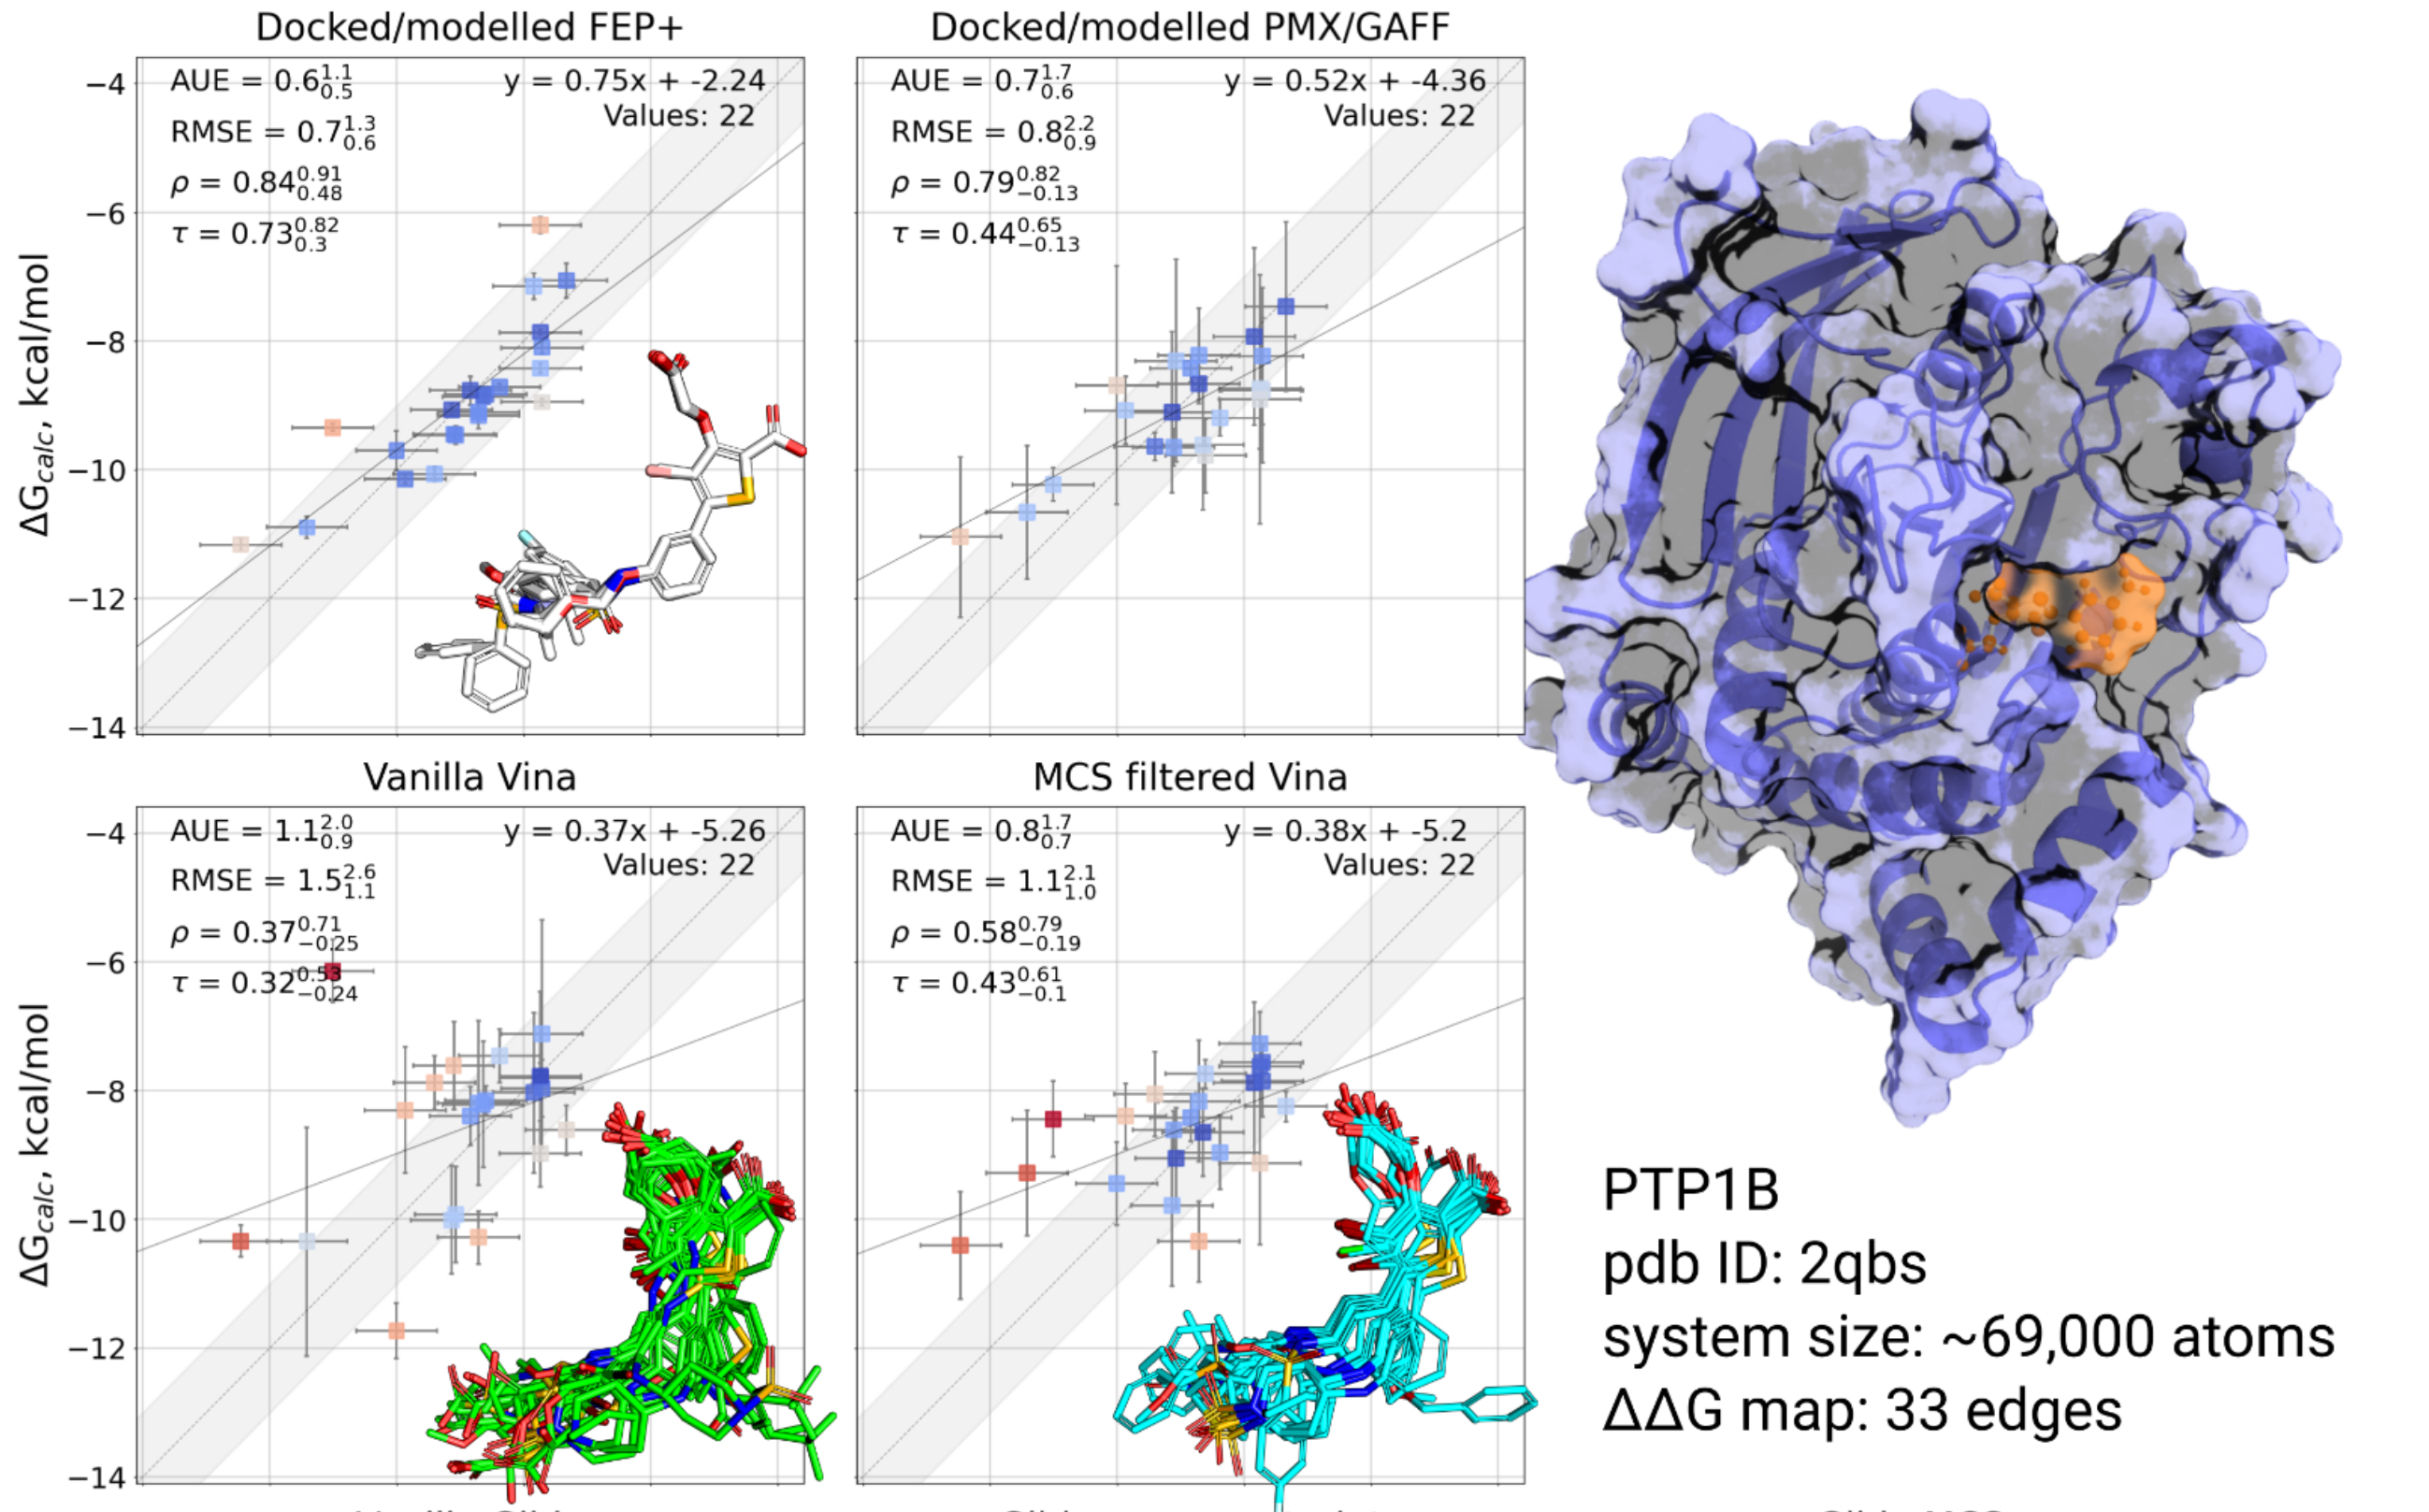 Comparison of experimentally measured and calculated binding affinities for PTP1B protein-ligand system